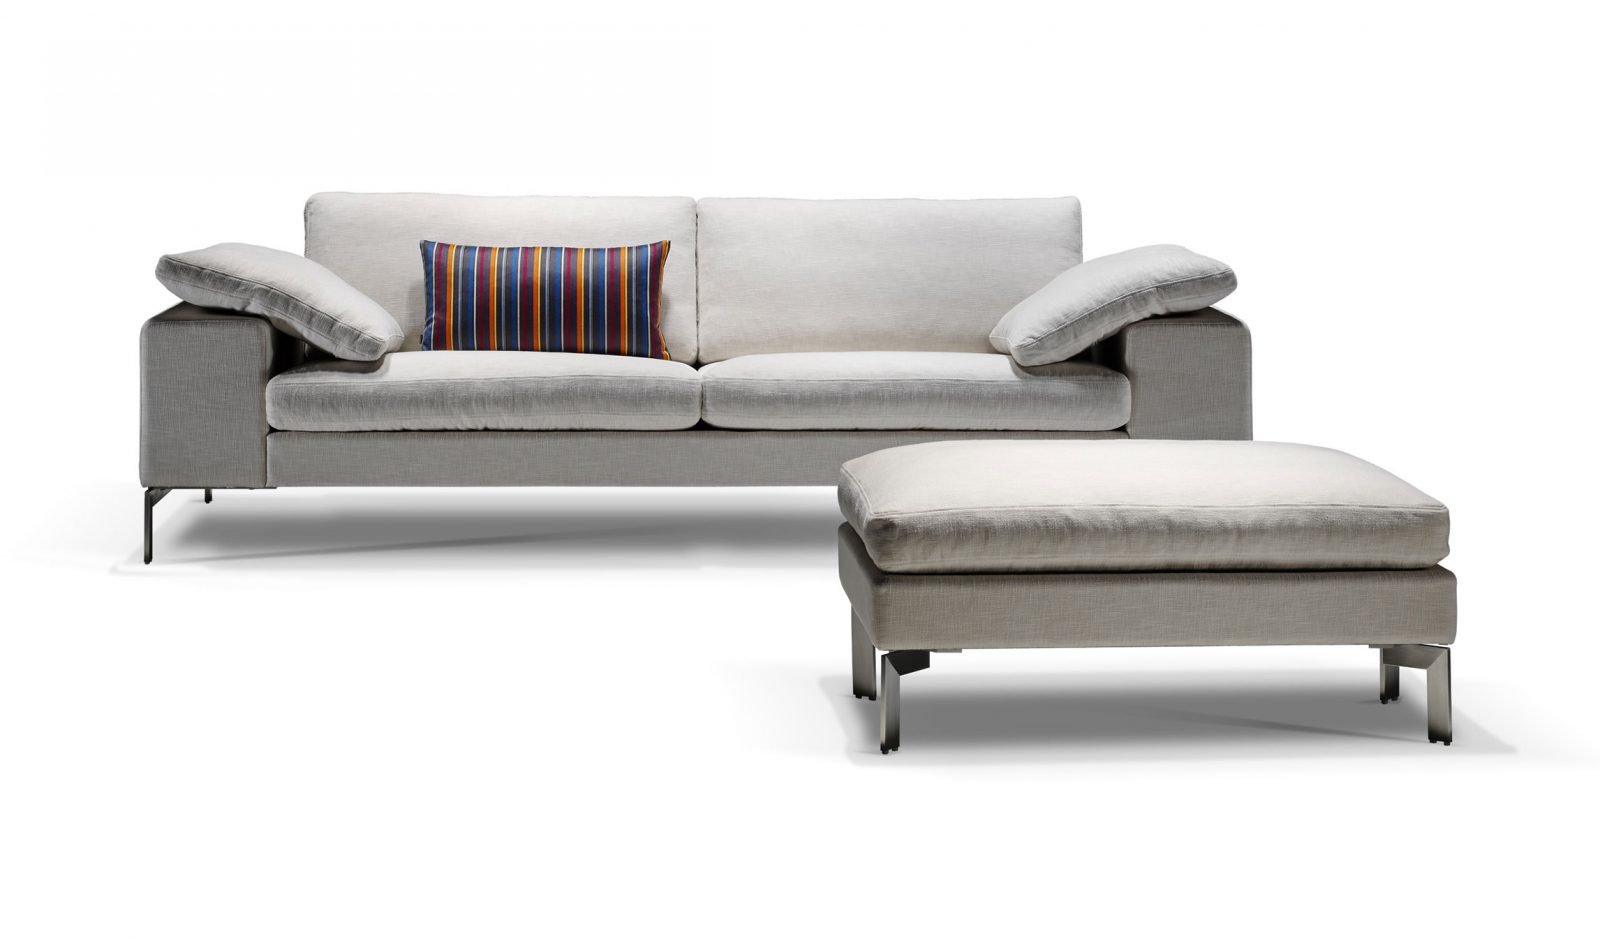 Søren Lund Vision Sofa available at Nordic Urban in Berlin